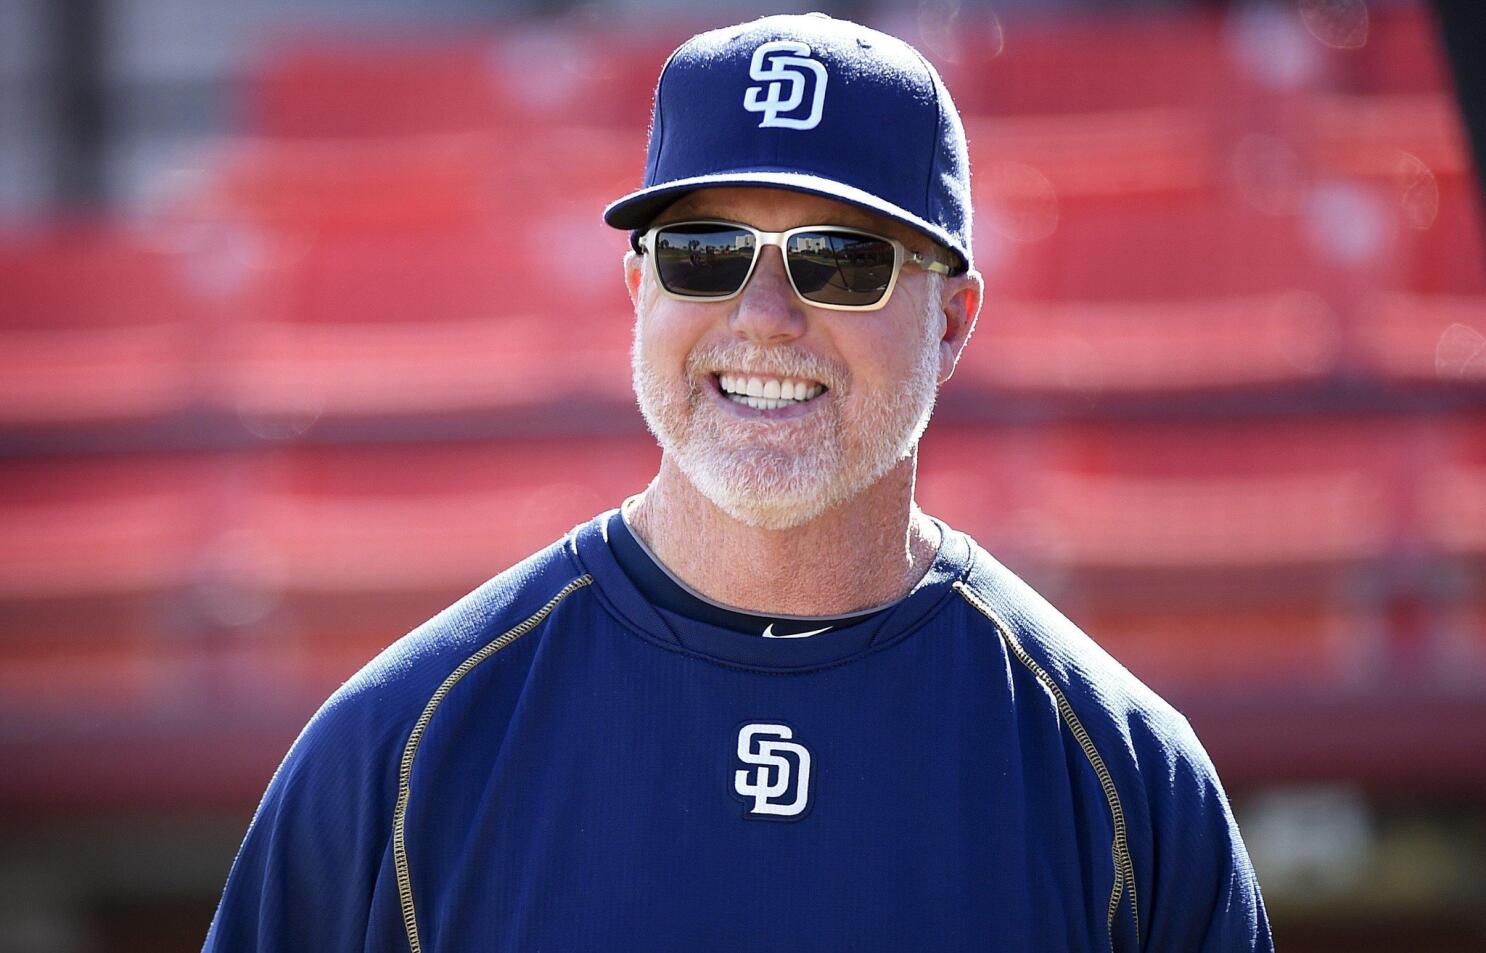 Mark McGwire - Cooperstown Expert